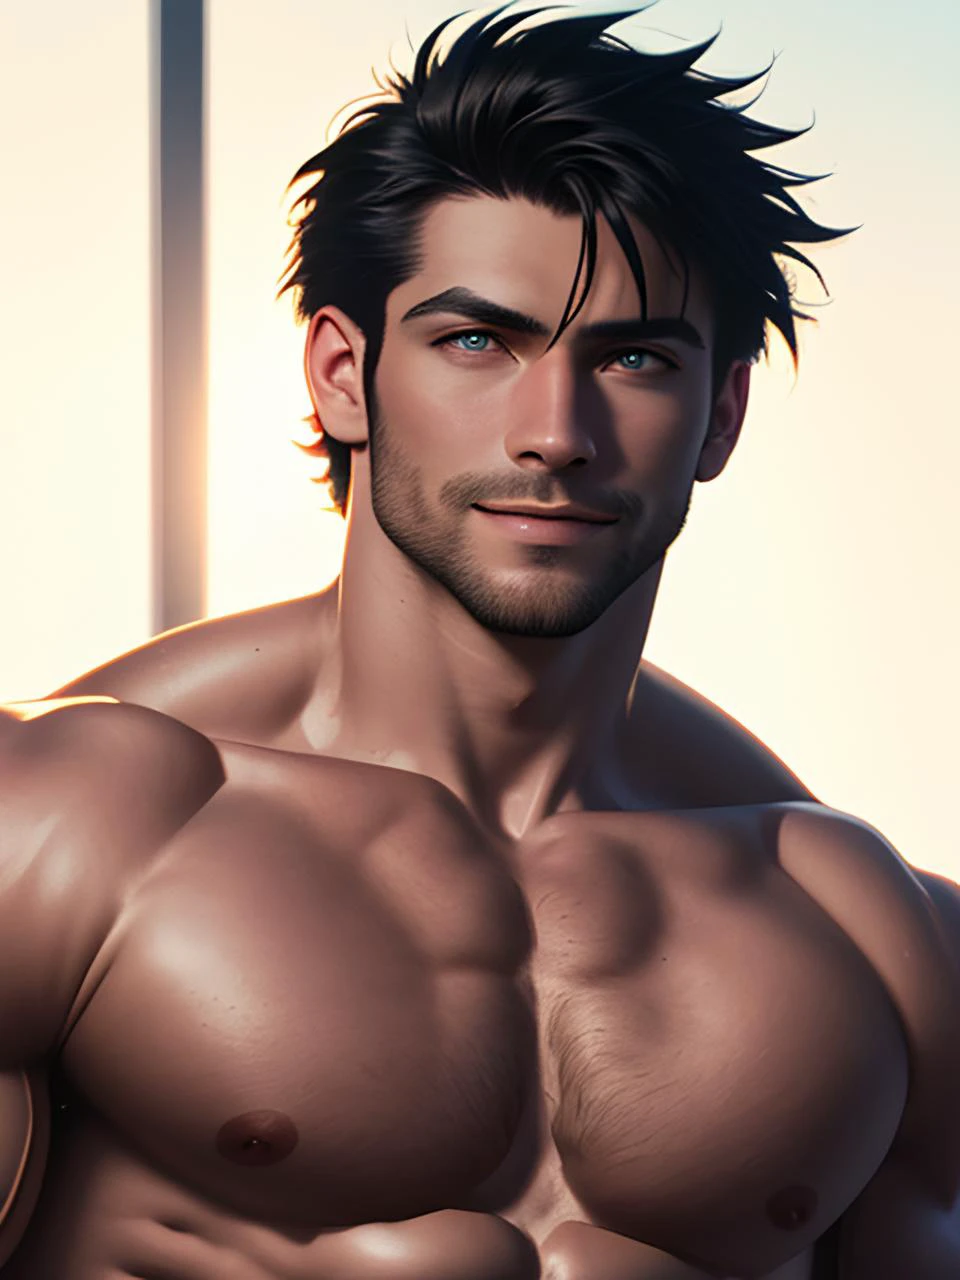 (one male) (portrait) (headshot).
Very detailed masculine face, heroic, detailed realistic open eyes, (muscular:1.5), (big muscles), (big pectorals), black hair, (slight smile). (shirtless) (topless male)
Realistic, photoreal, studio portrait, high definition, high contrast, high saturation, highly detailed, high quality, masterpiece, rim lighting, back lighting, volumetric light, vibrant colors.
